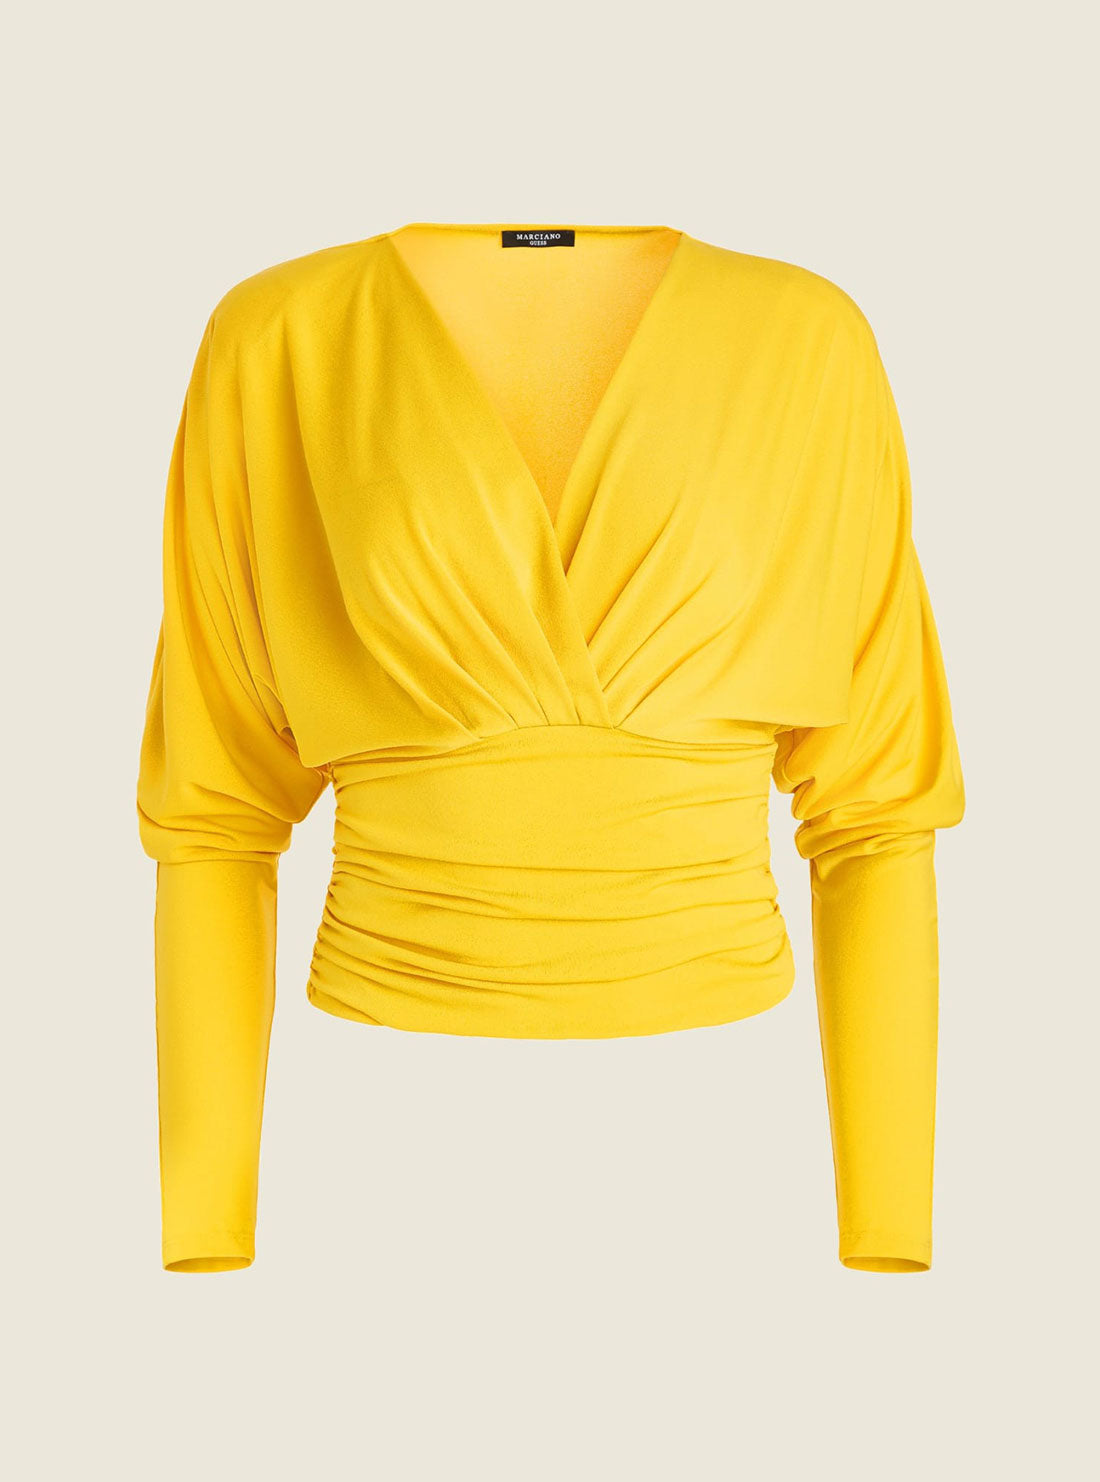 Marciano Gold Whisper Knit Top